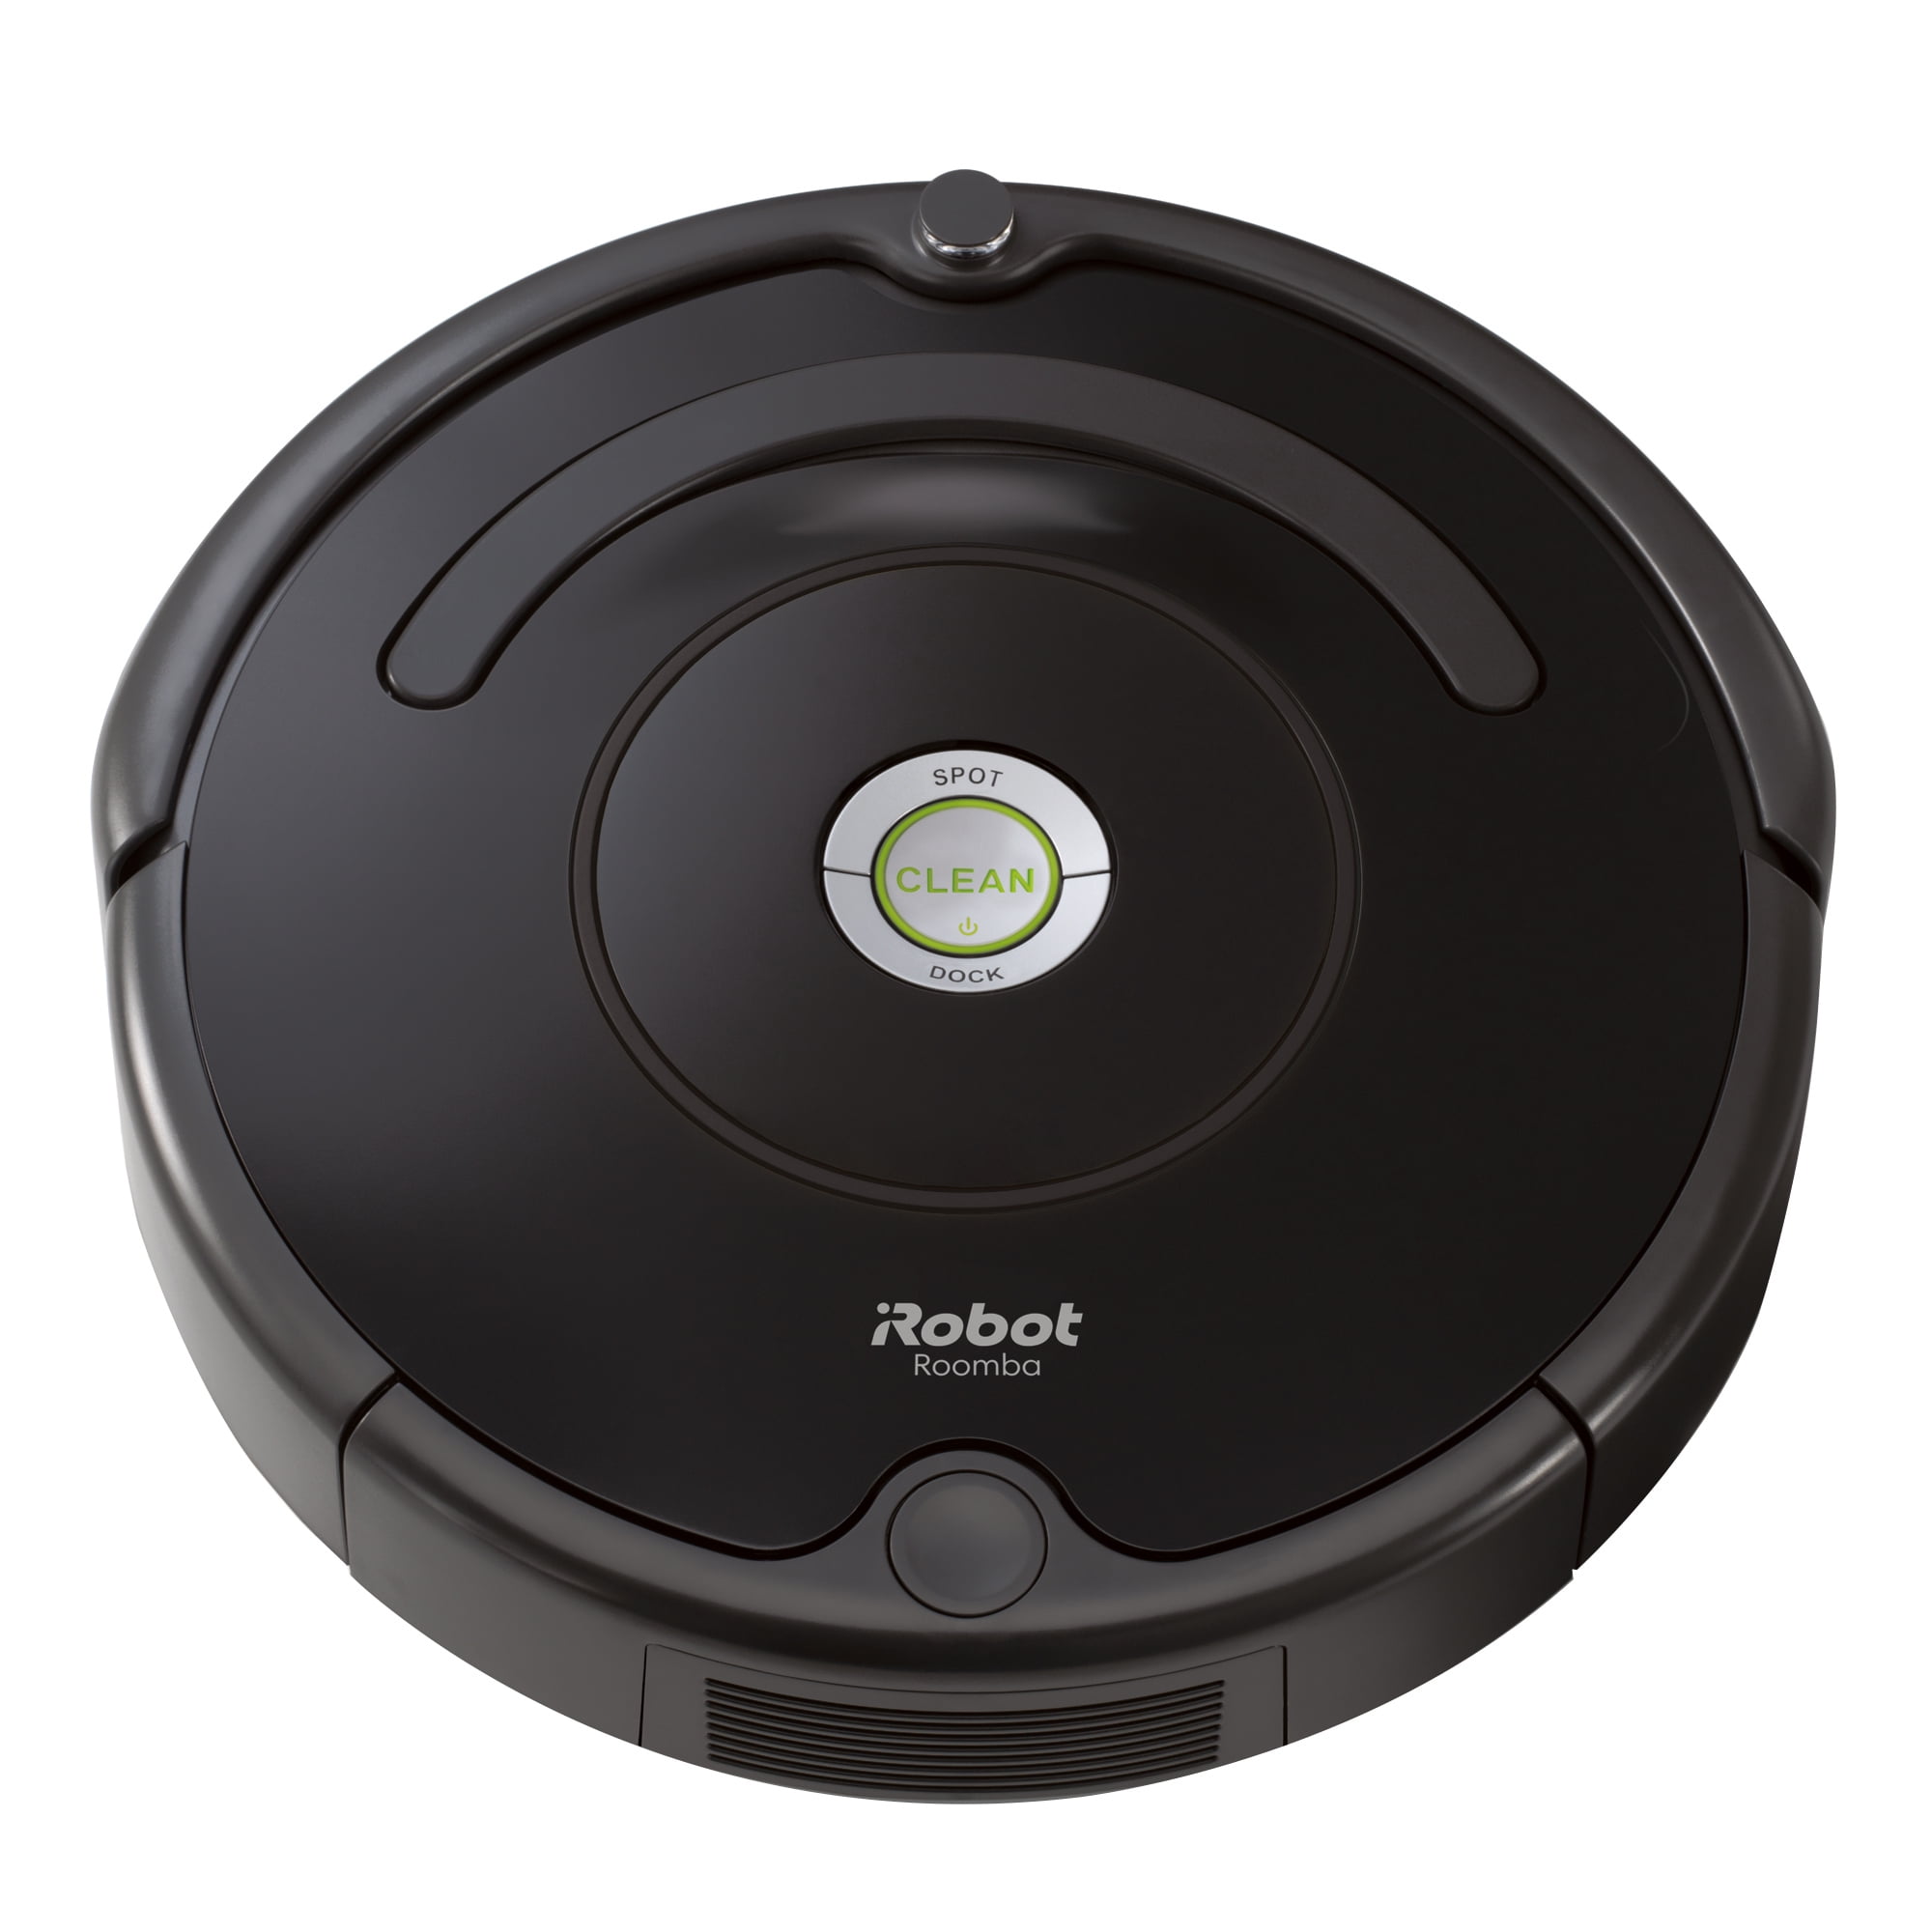 Self Charging iRobot Roomba 614 Robot Vacuum Fast Shipping WiFi Connectivity 